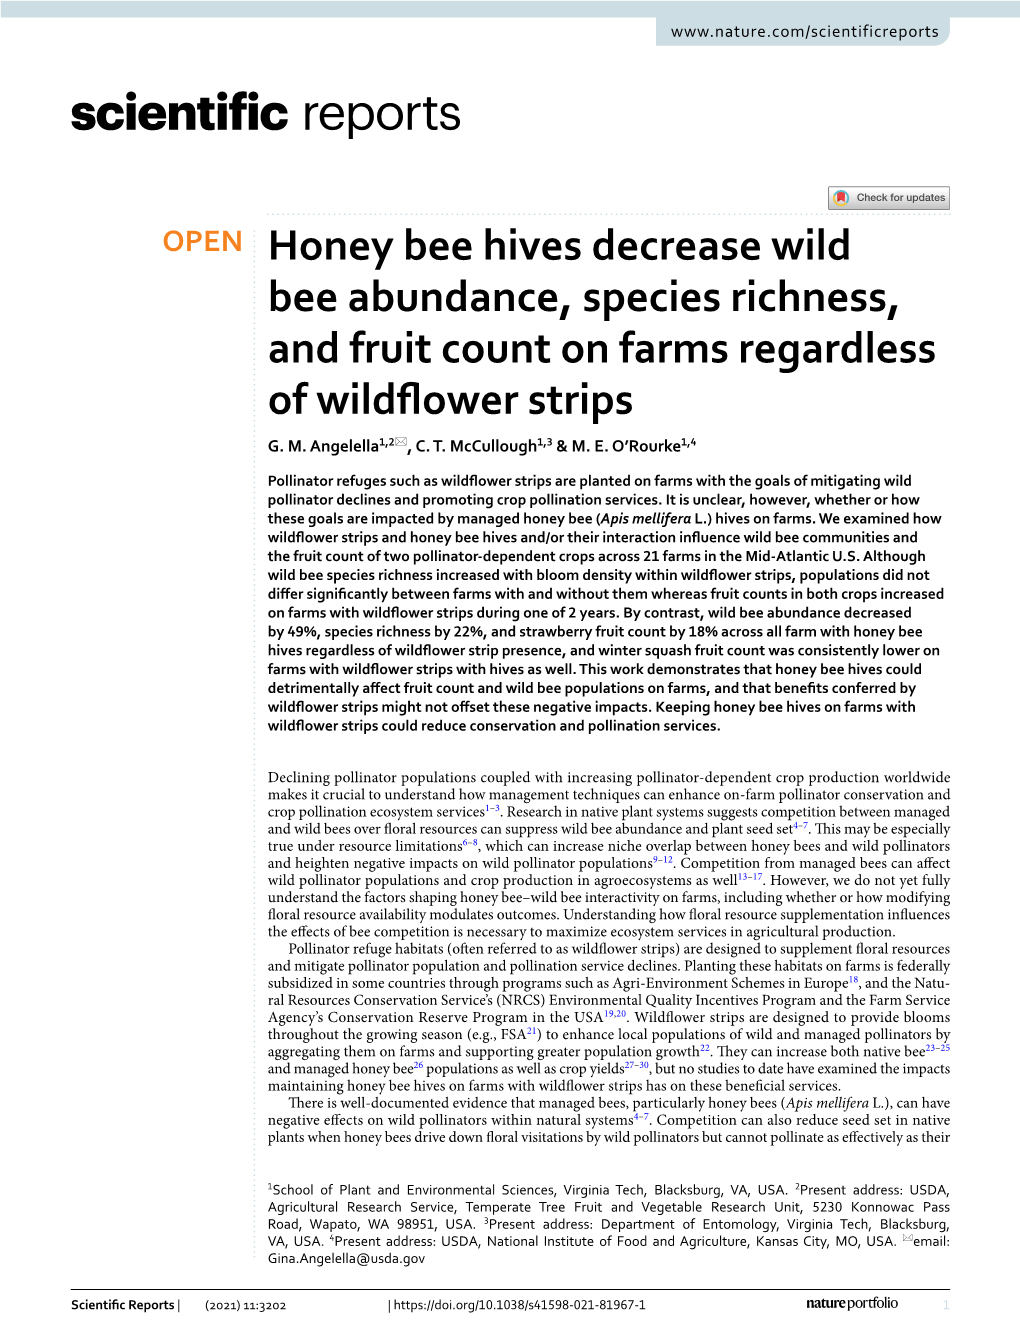 Honey Bee Hives Decrease Wild Bee Abundance, Species Richness, and Fruit Count on Farms Regardless of Wildfower Strips G